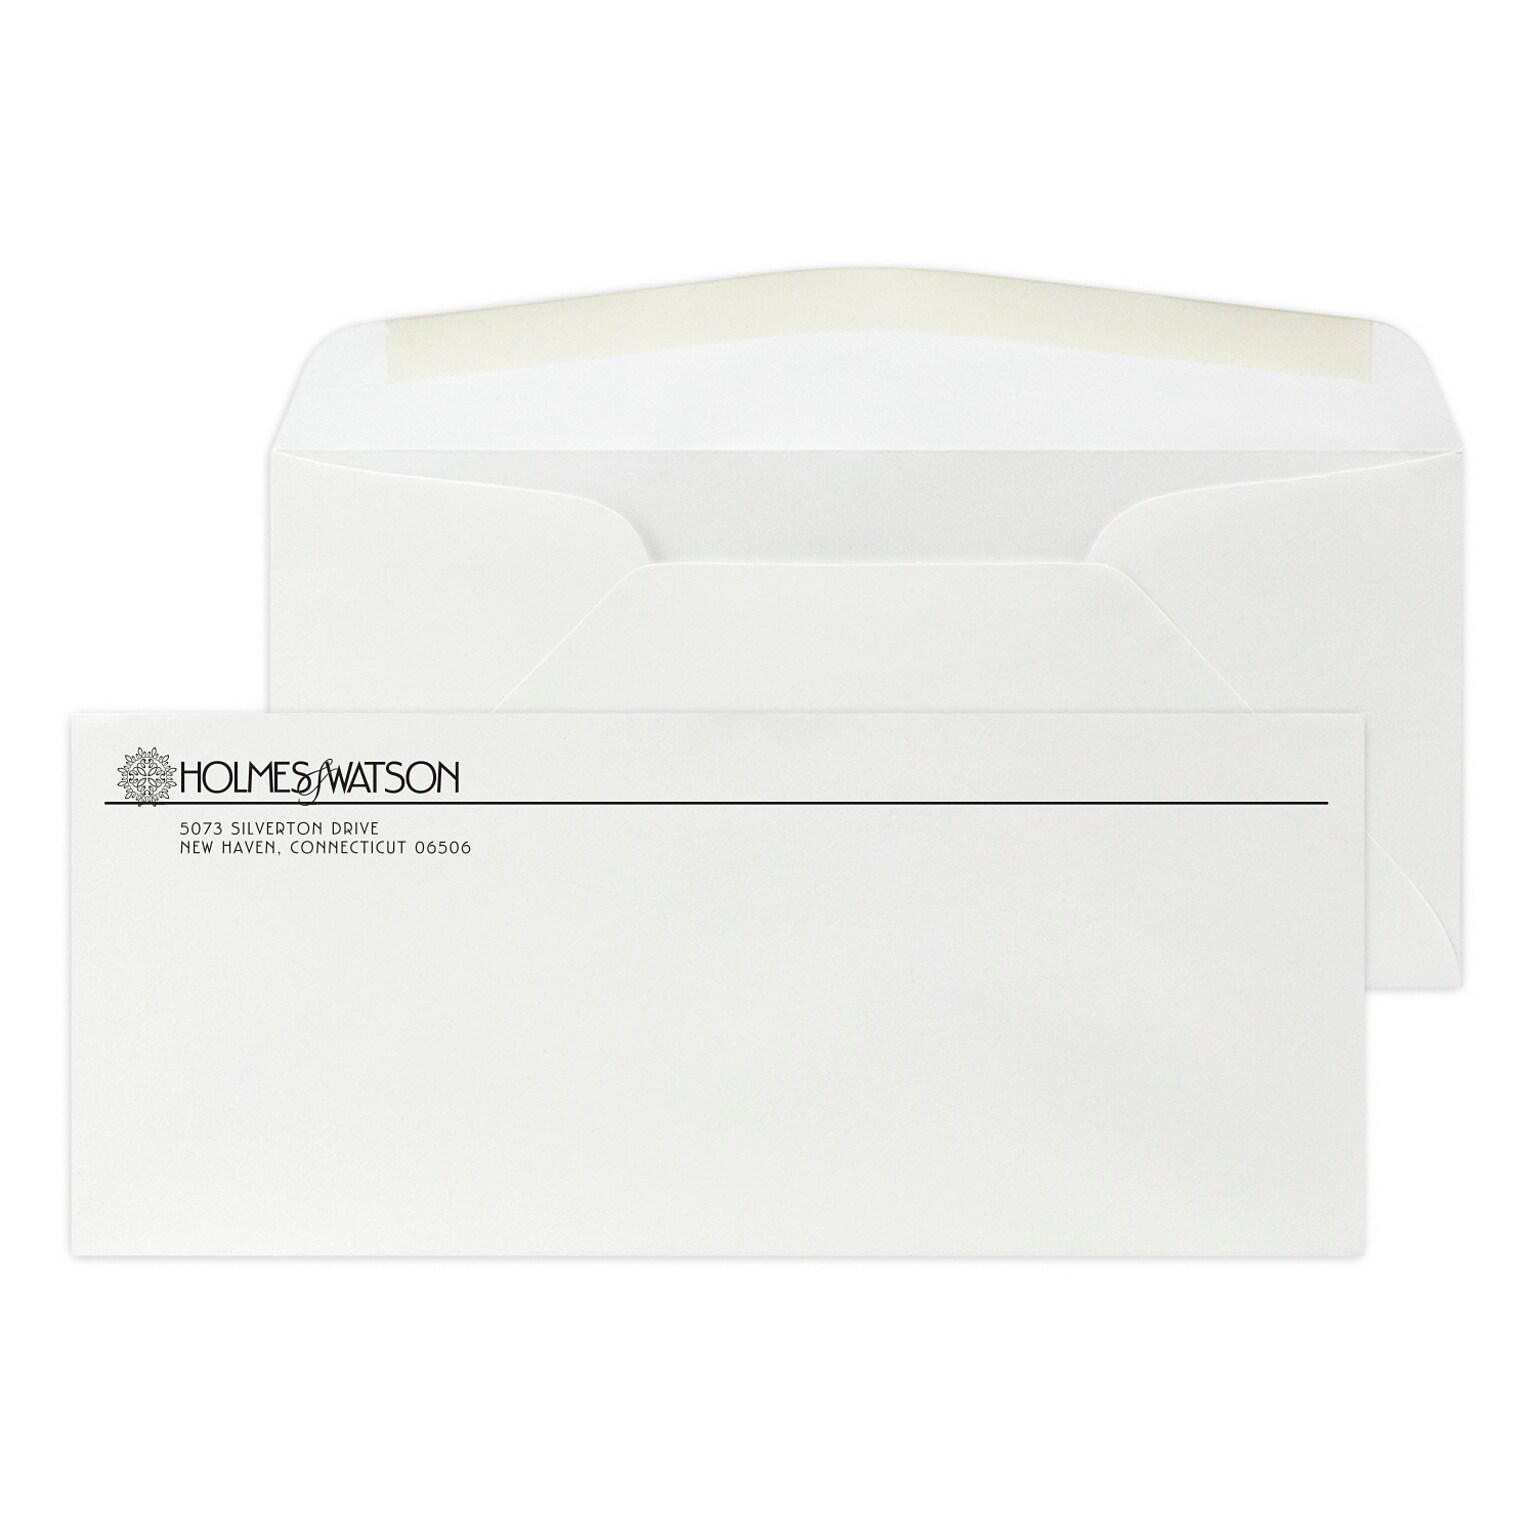 Custom #10 Stationery Envelopes, 4 1/4 x 9 1/2, 24# ENVIRONMENT® White Recycled, 1 Standard Flat Ink, 250 / Pack